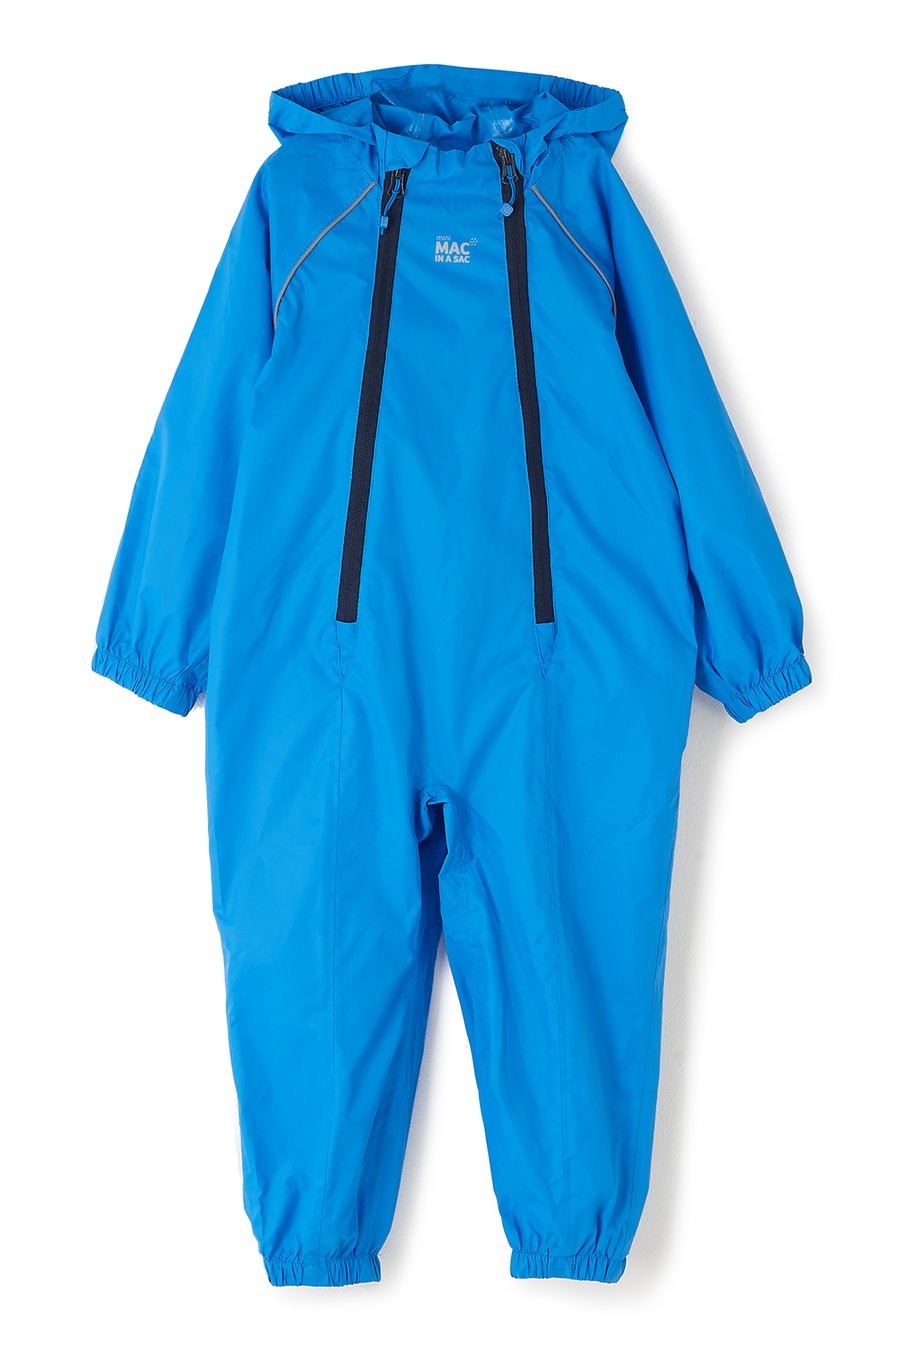 Mac_in_a_sac_puddlesuit_oceanblue